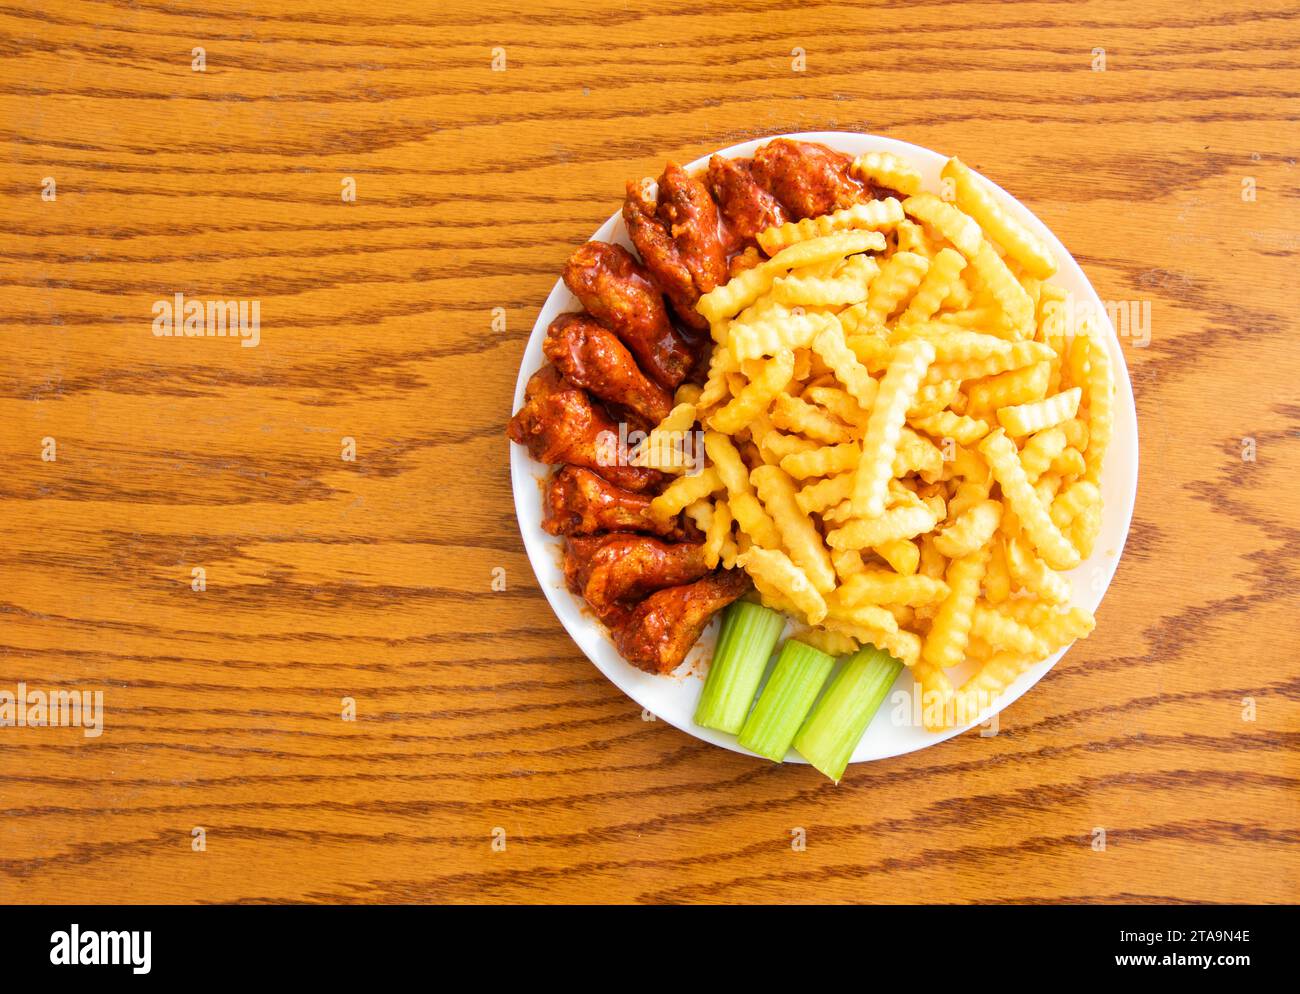 Hot Wing with Fries Stock Photo